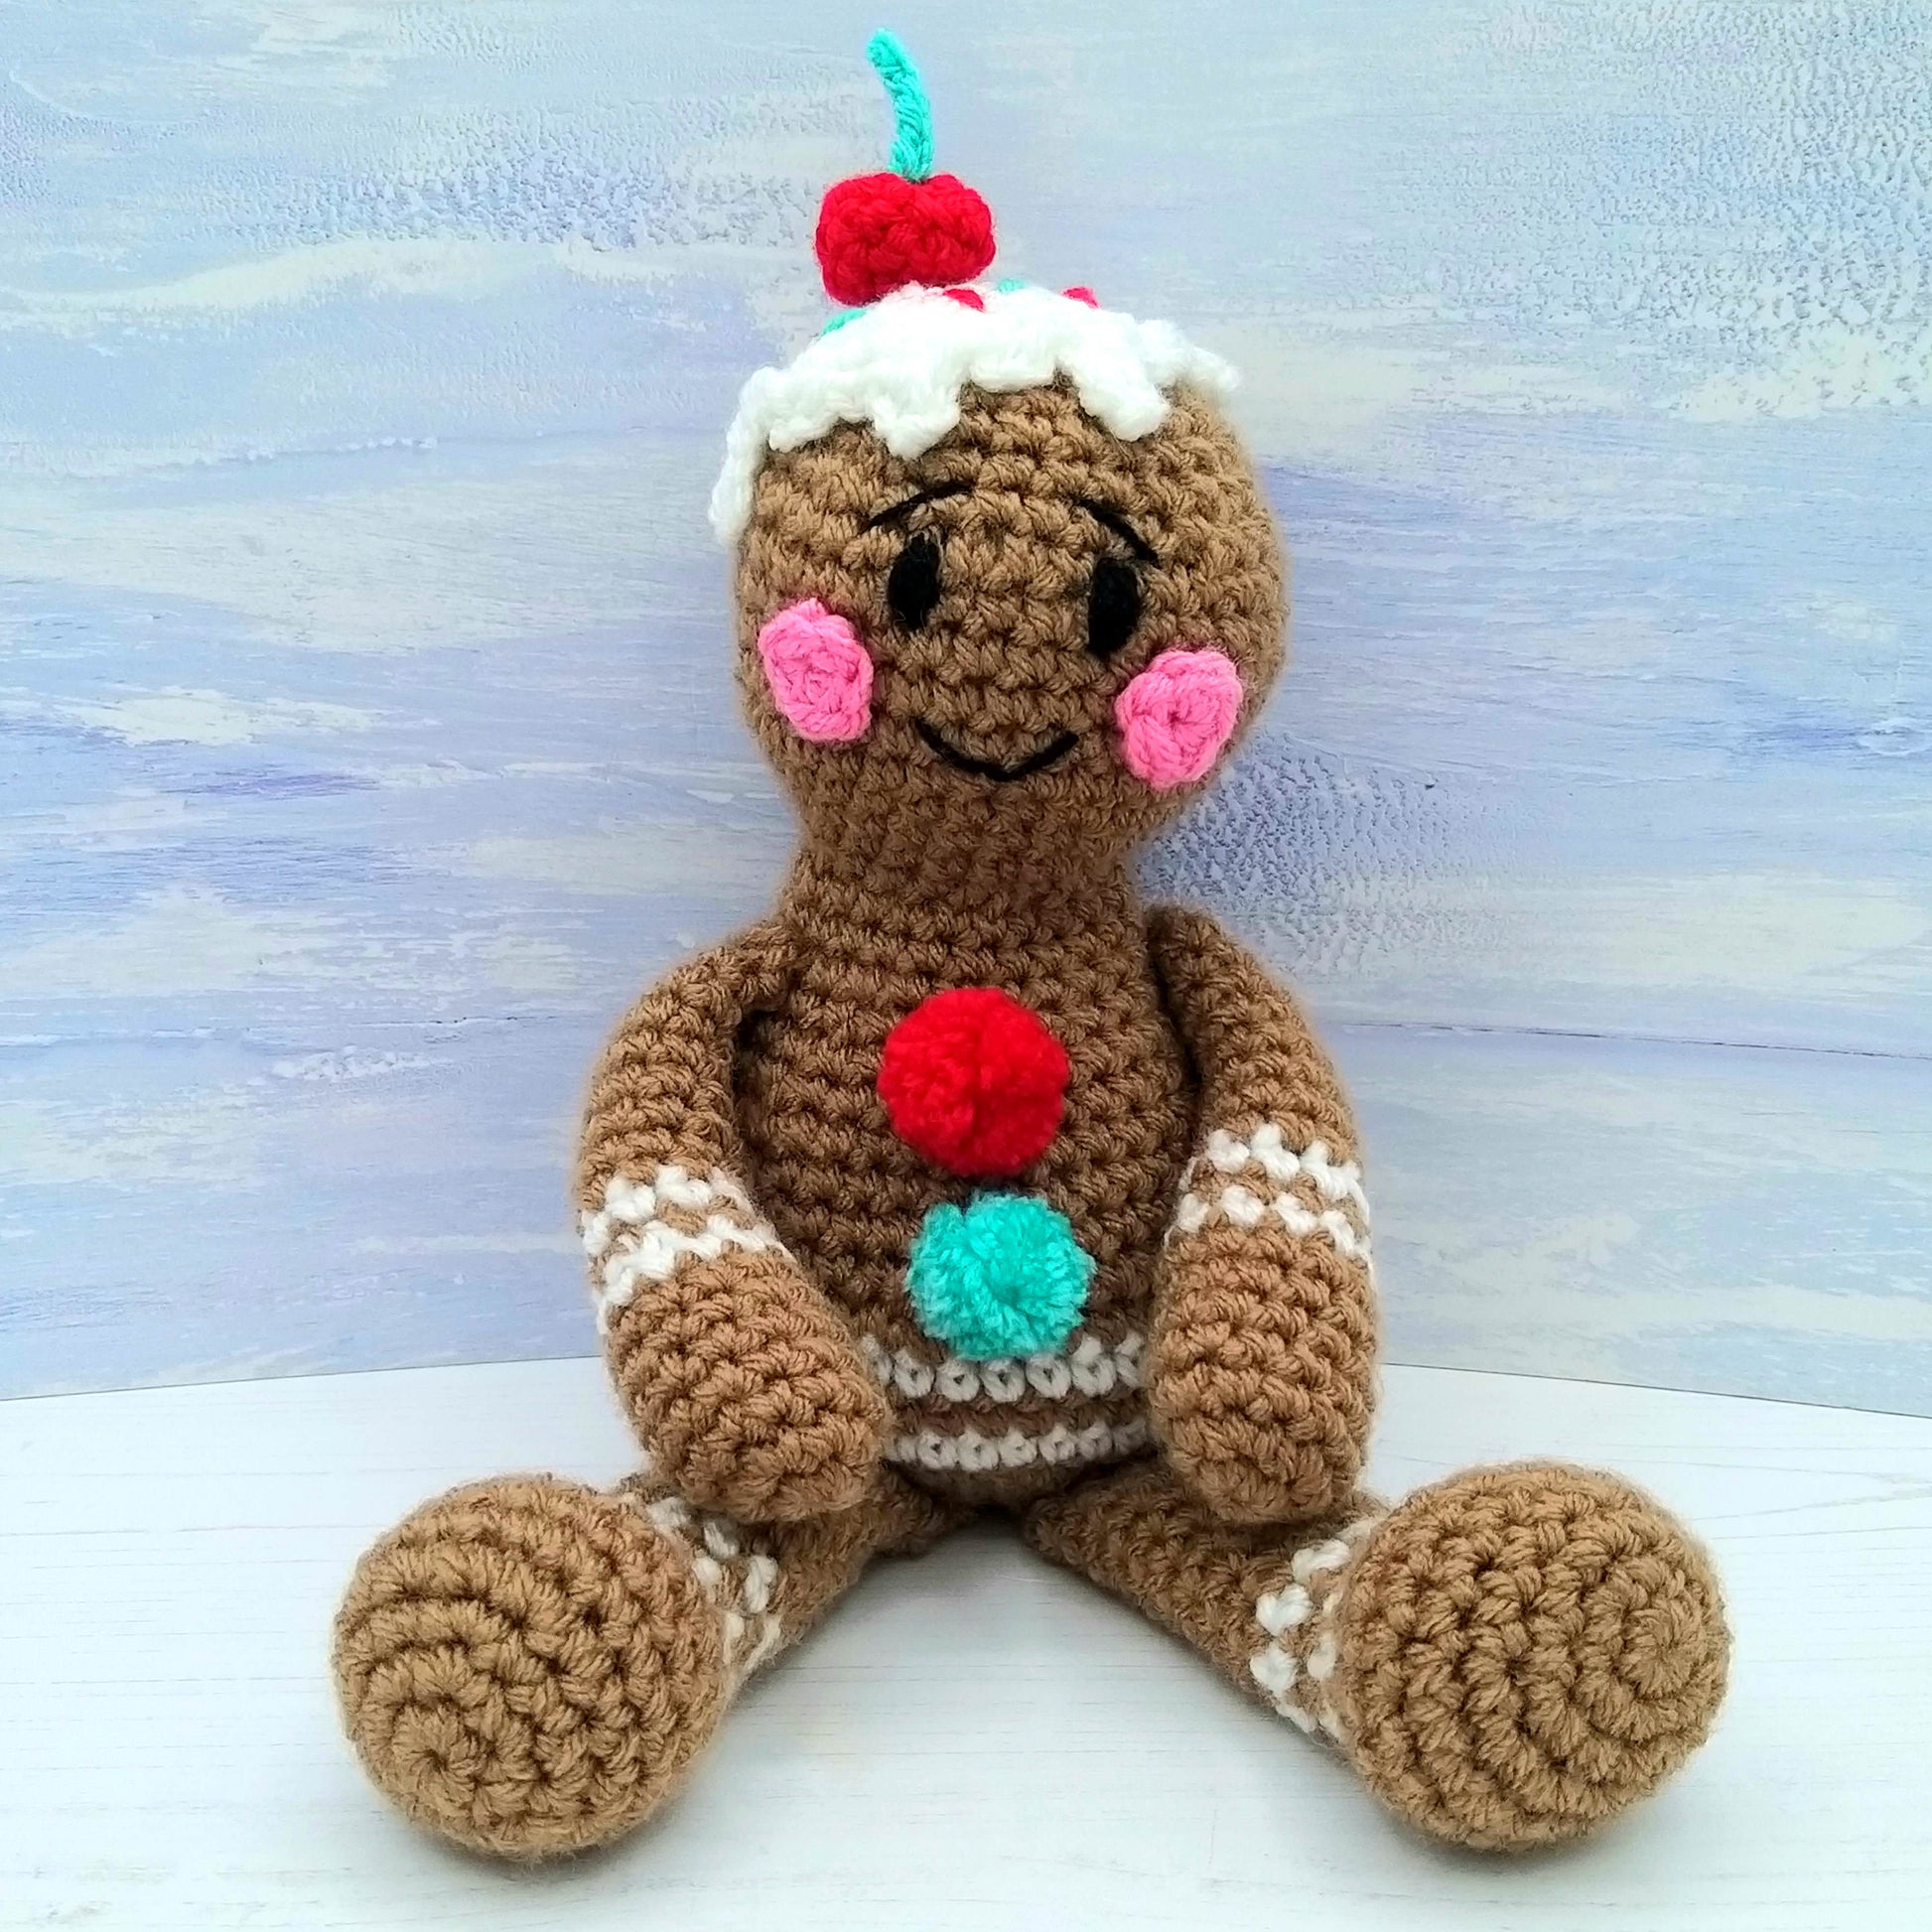 Gingerbread man seated